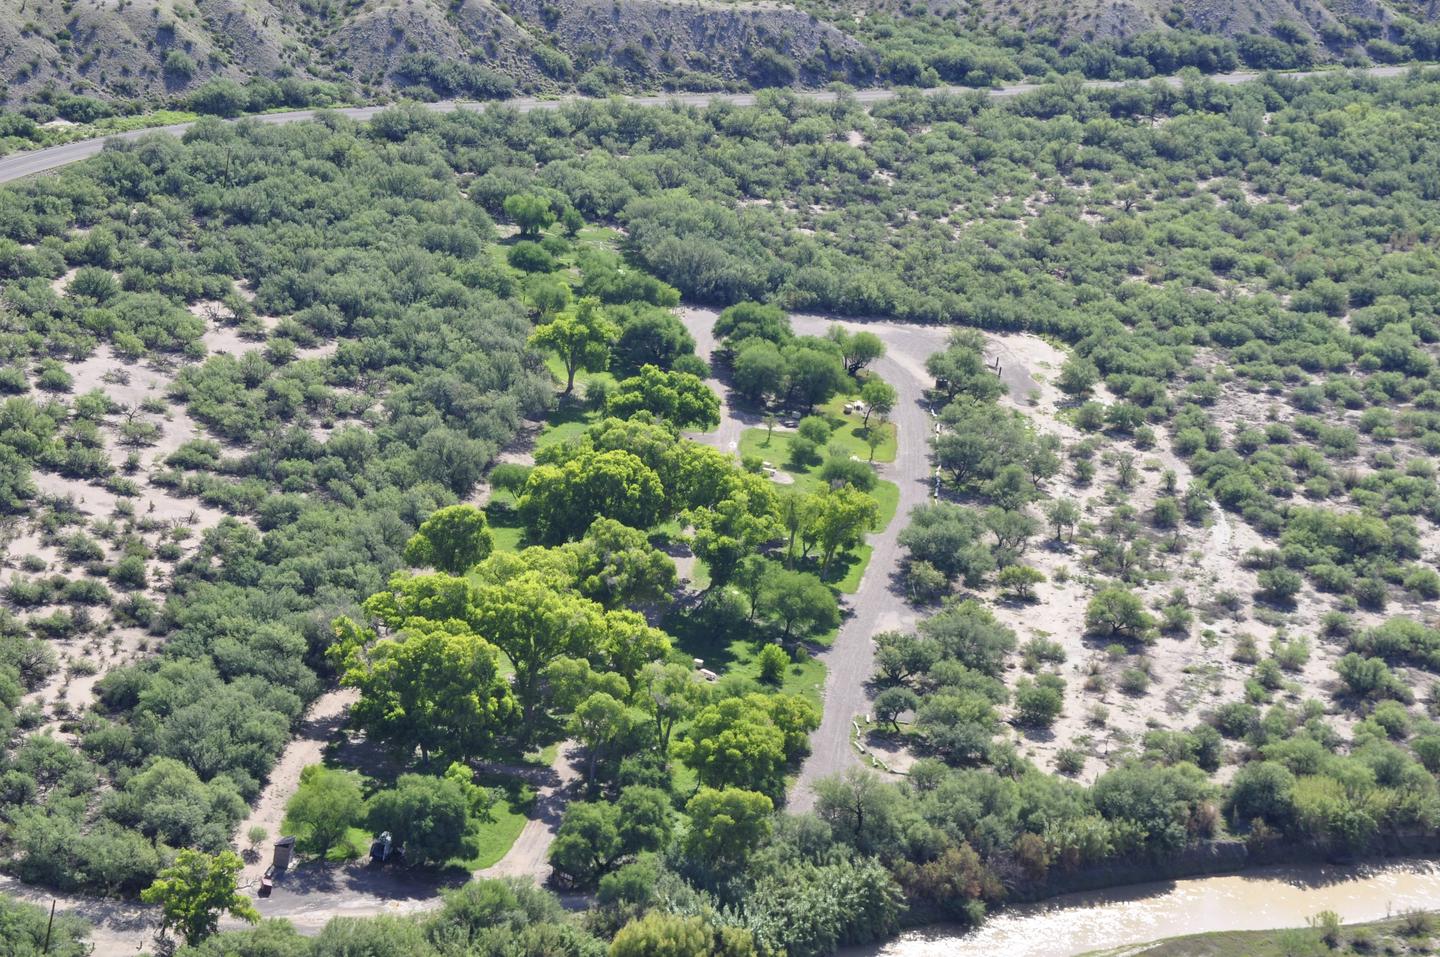 Aerial view of Cottonwood Campground, bright green trees amidst the low desert, riparian areaAerial view of Cottonwood Campground